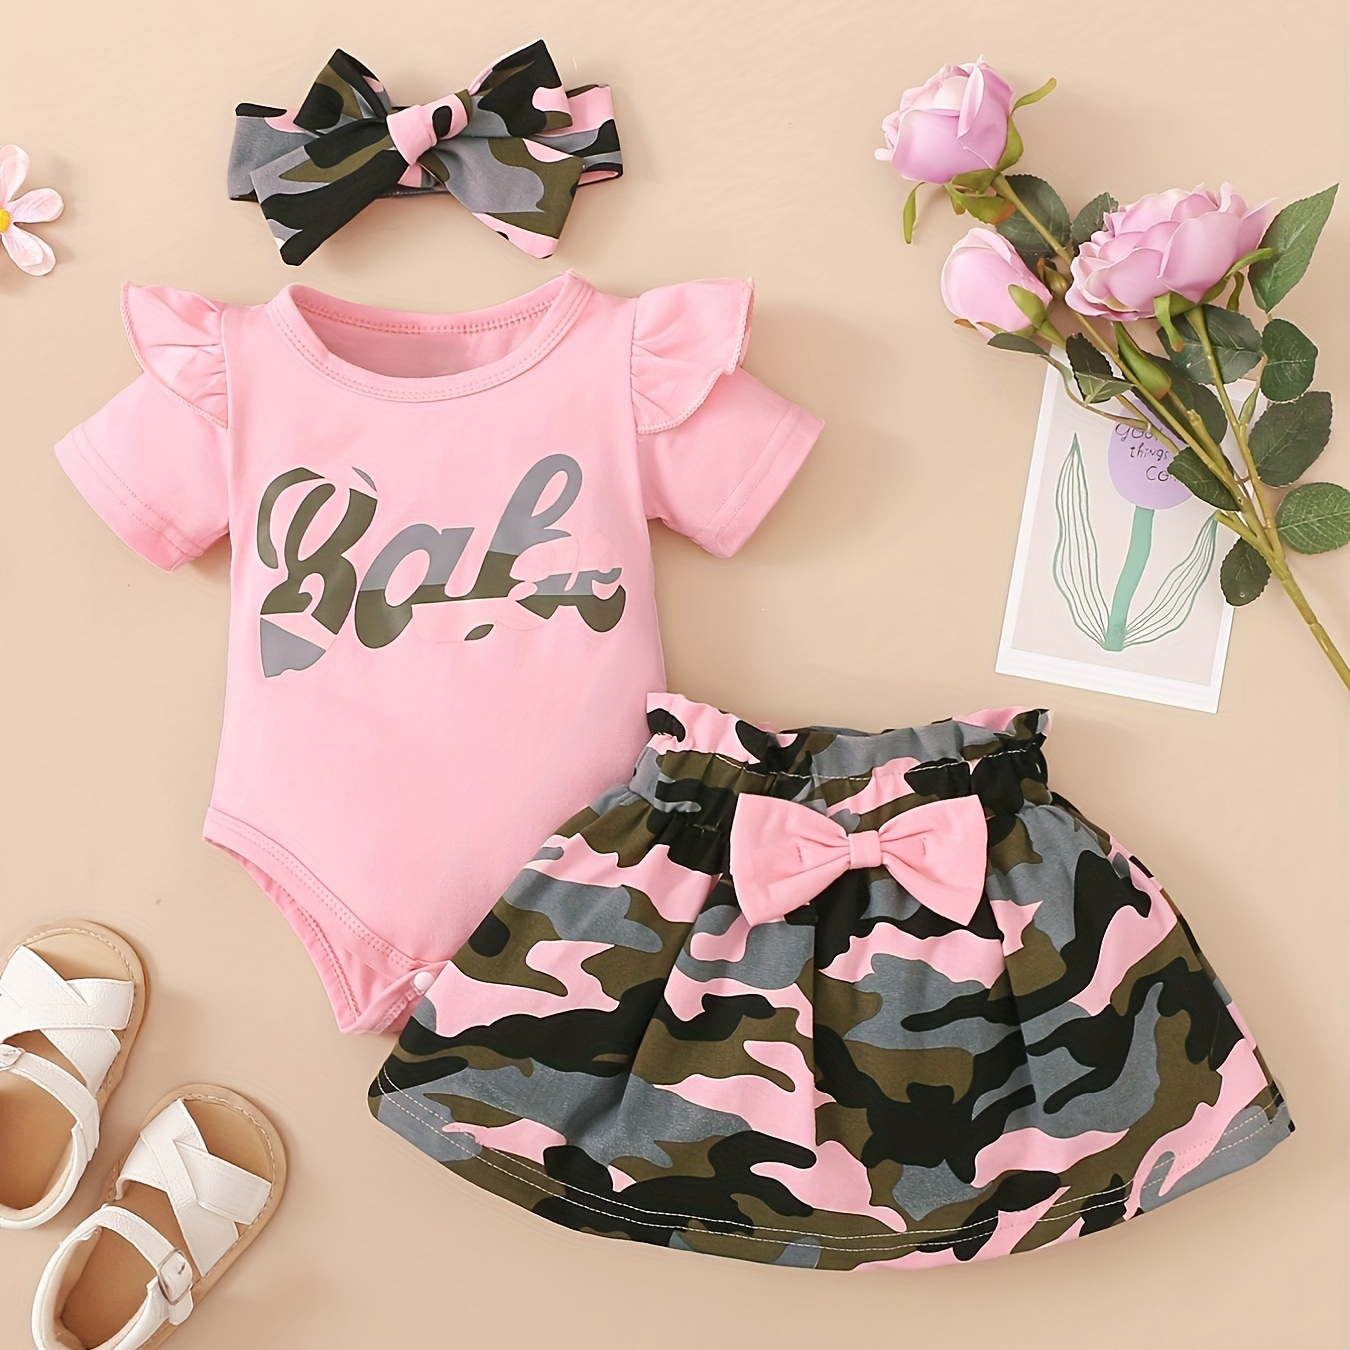 

Baby Girls Cute Casual Fly Sleeve "babe" Print Onesie & Bow Camouflage Print Skirt & Bow Headband Set For Summer